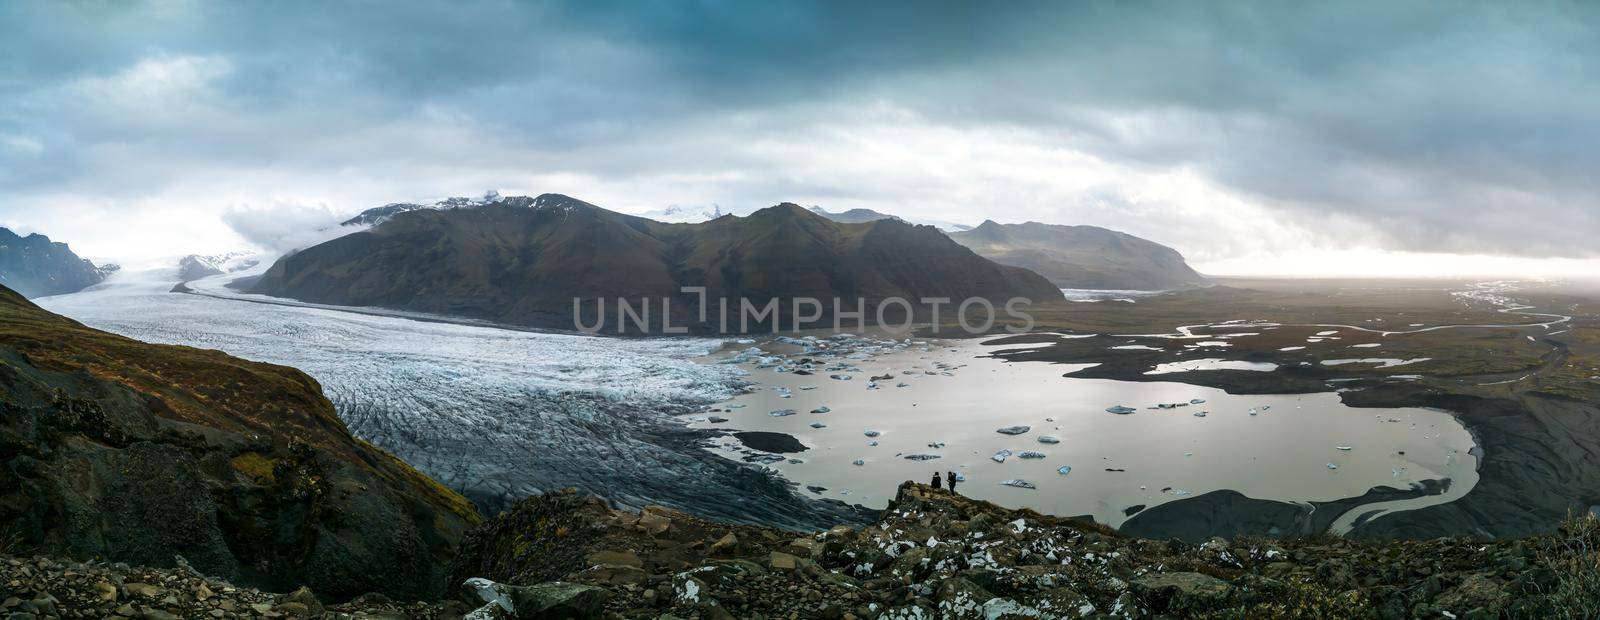 Spectacular viewpoint to massive glacier with tourists by FerradalFCG